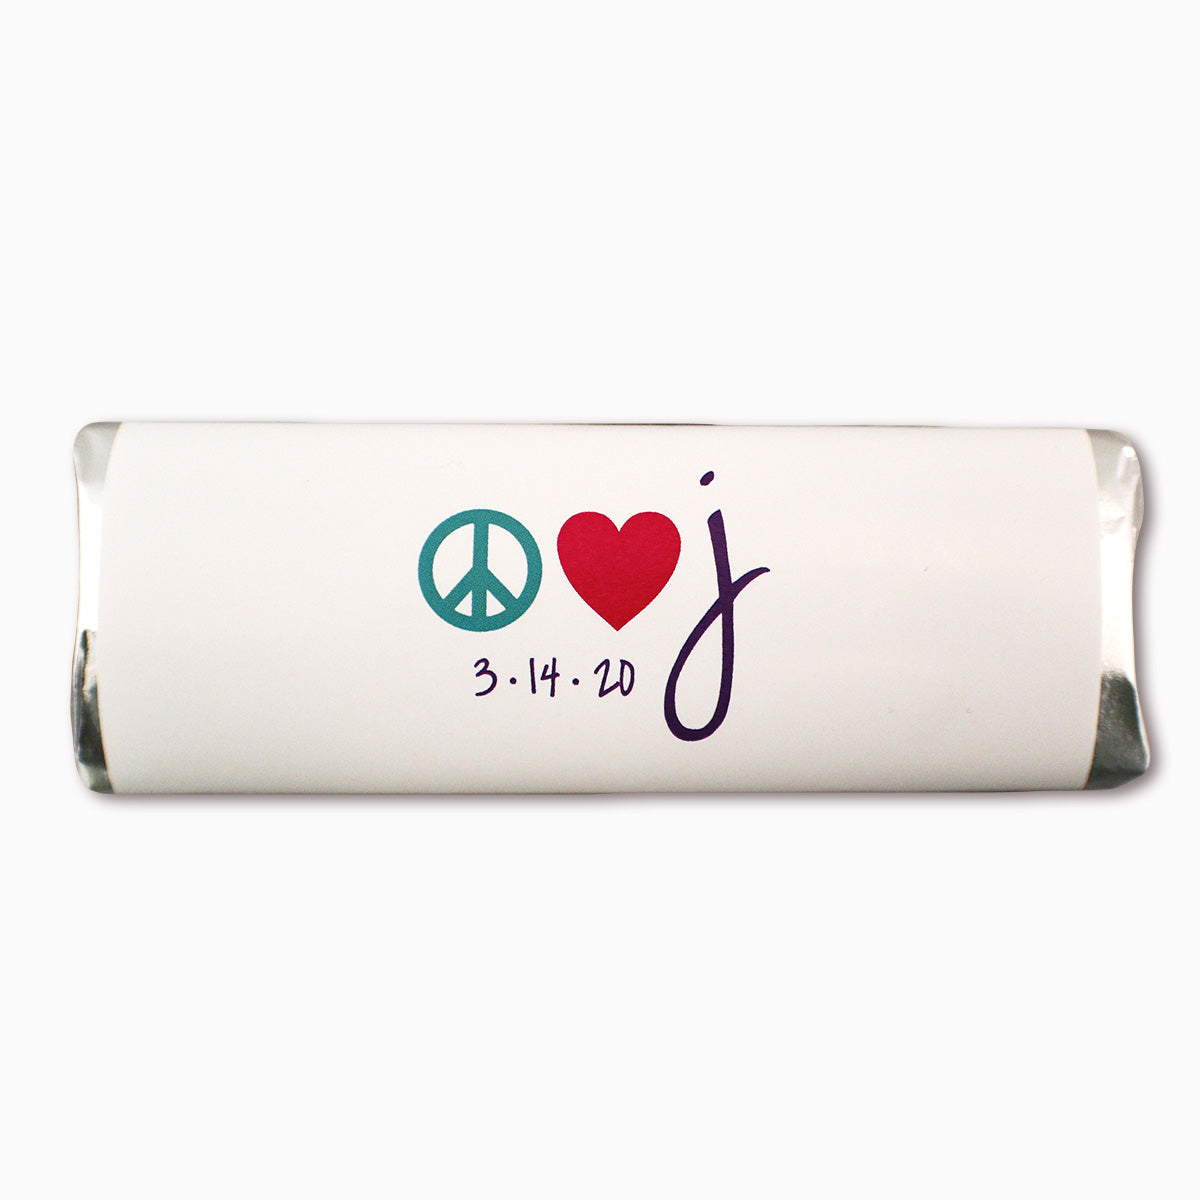 Chocolate Bar with white wrapped that has a peace sign, a heart, and the letter "J". A small date for March 14, 2020 is underneath. 